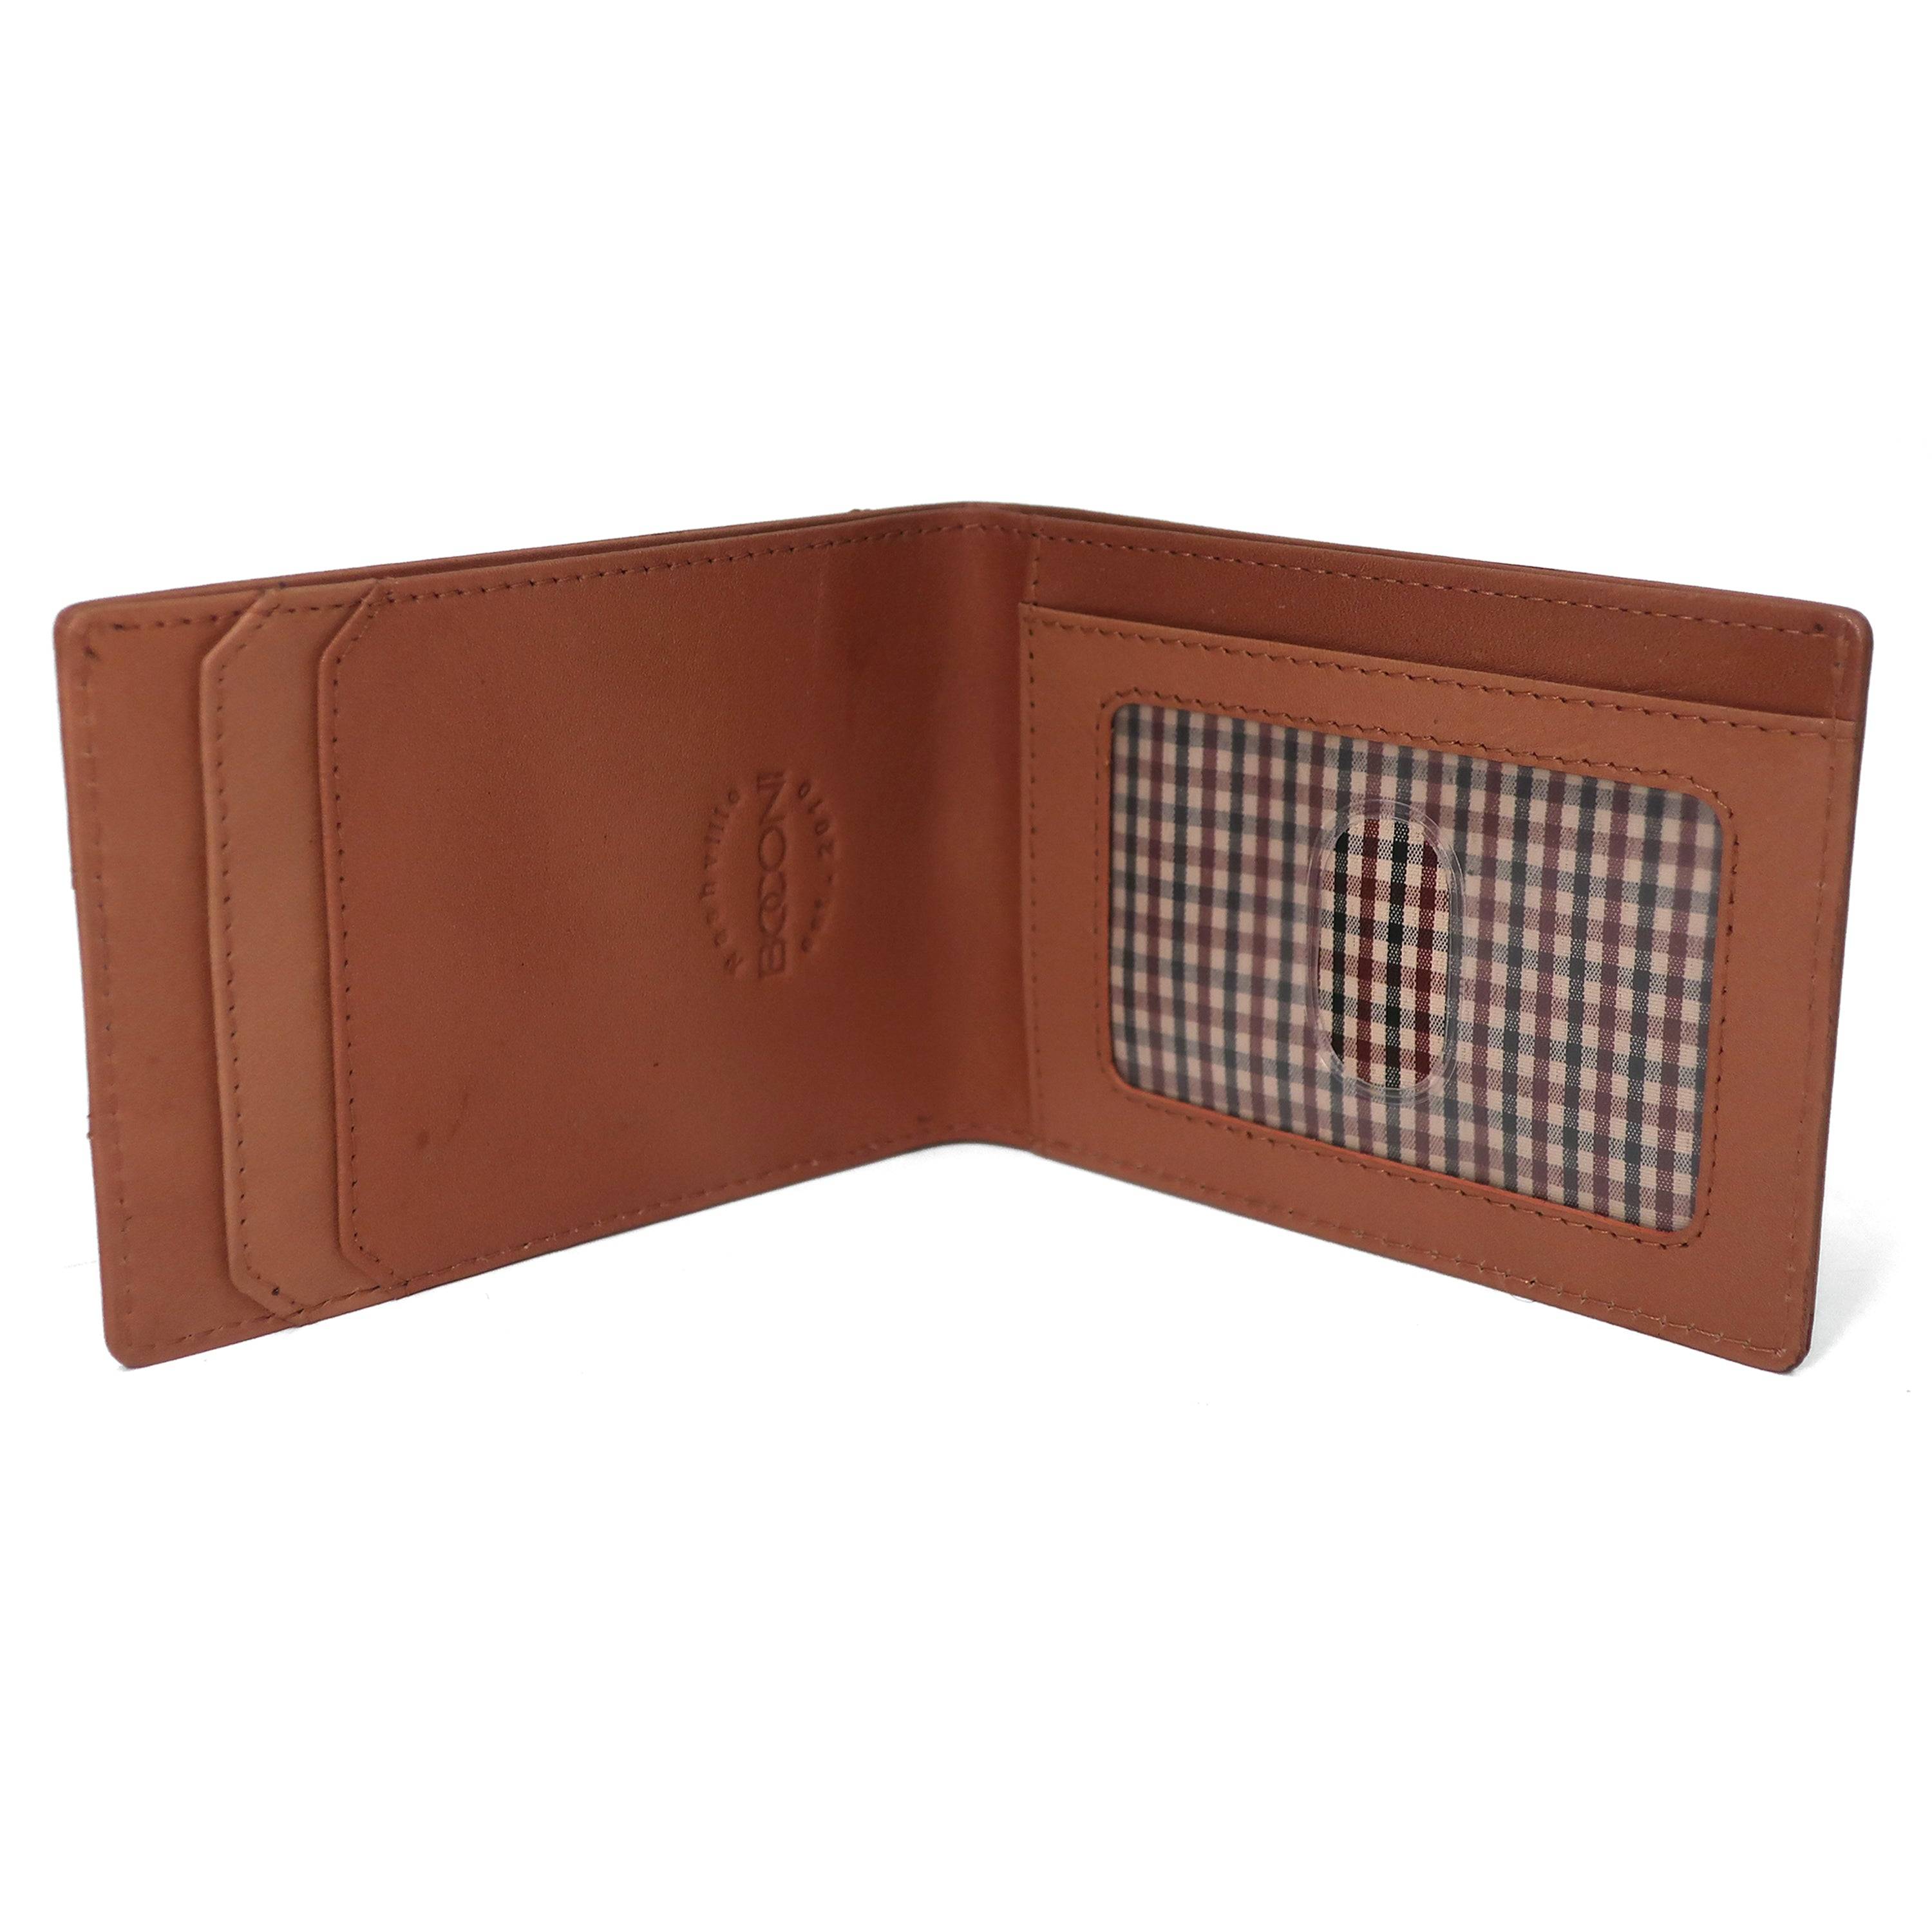 Interior view Dawn Hand Burnished Leather Bifold Wallet  with ID Window, Cognac